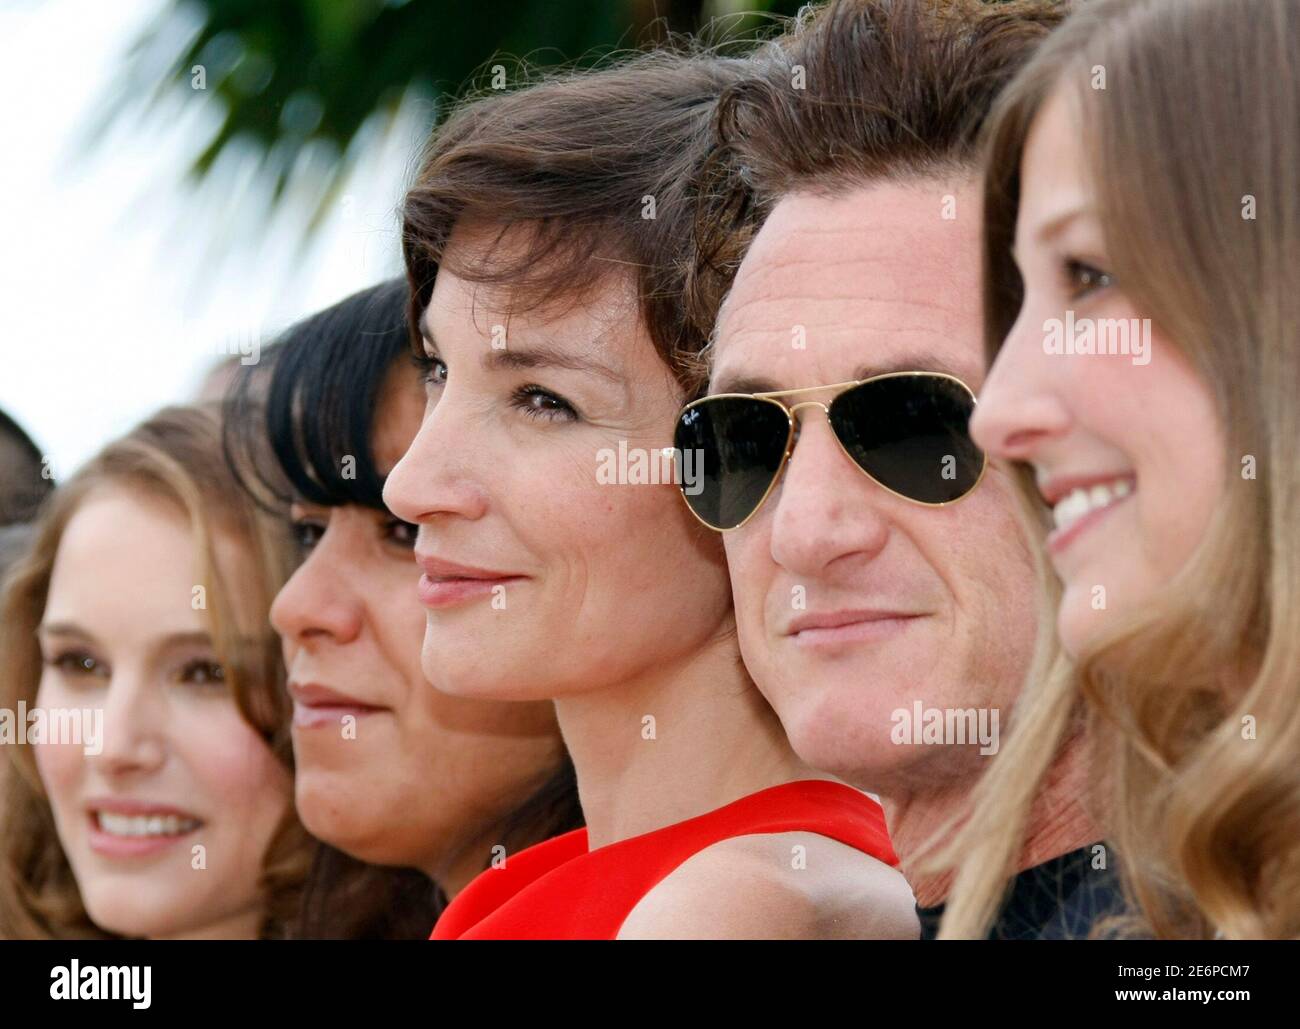 President of the Jury Sean Penn (2nd R) poses with jury members Natalie  Portman, Marjane Satrapi, Jeanne Balibar and Alexandra Maria Lara (L-R)  during a photo call at the 61st Cannes Film